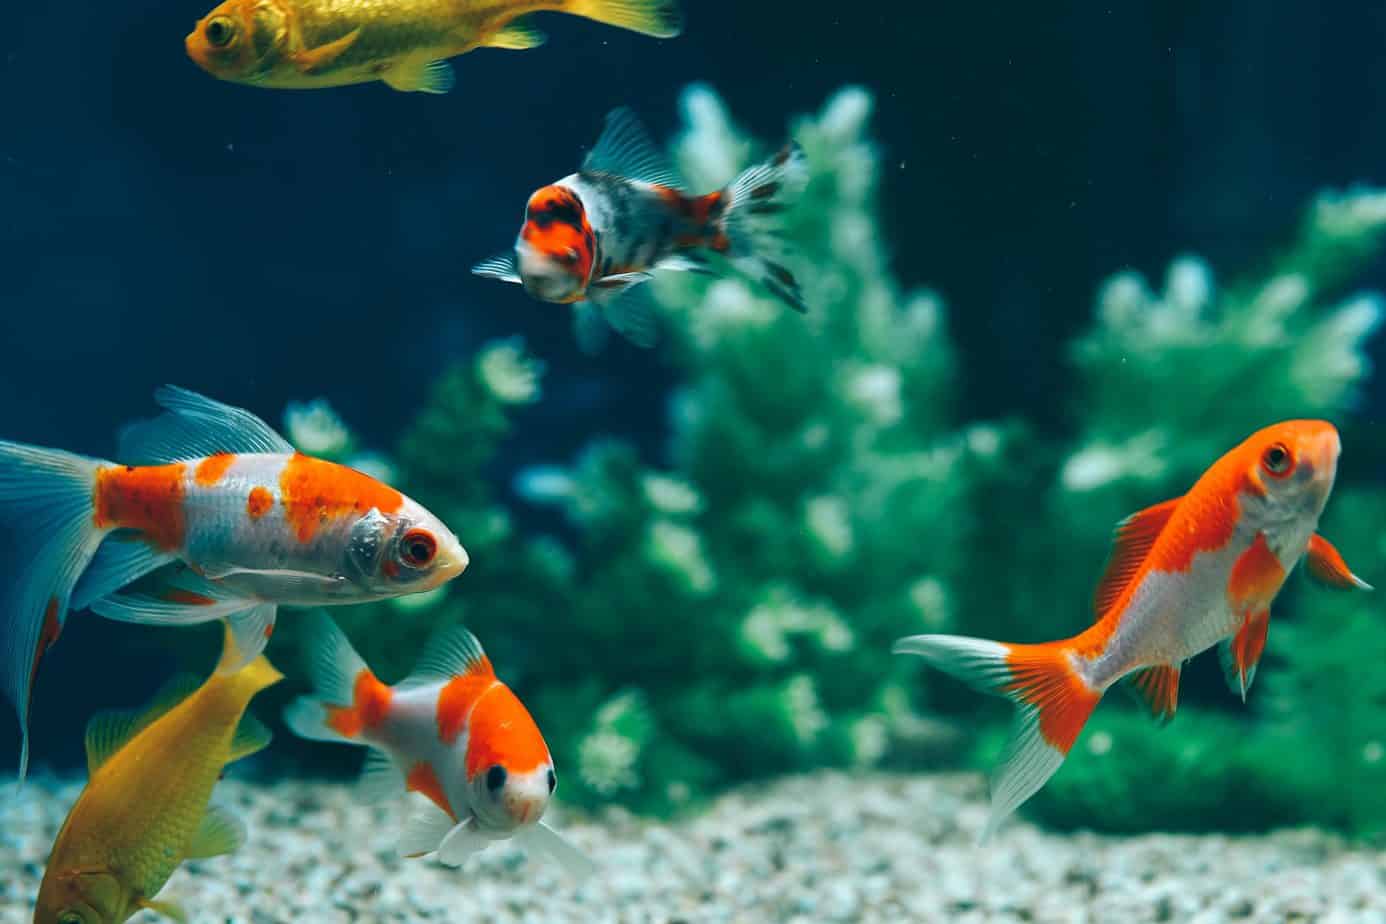 Aquarium fish for beginners – which ones to choose?